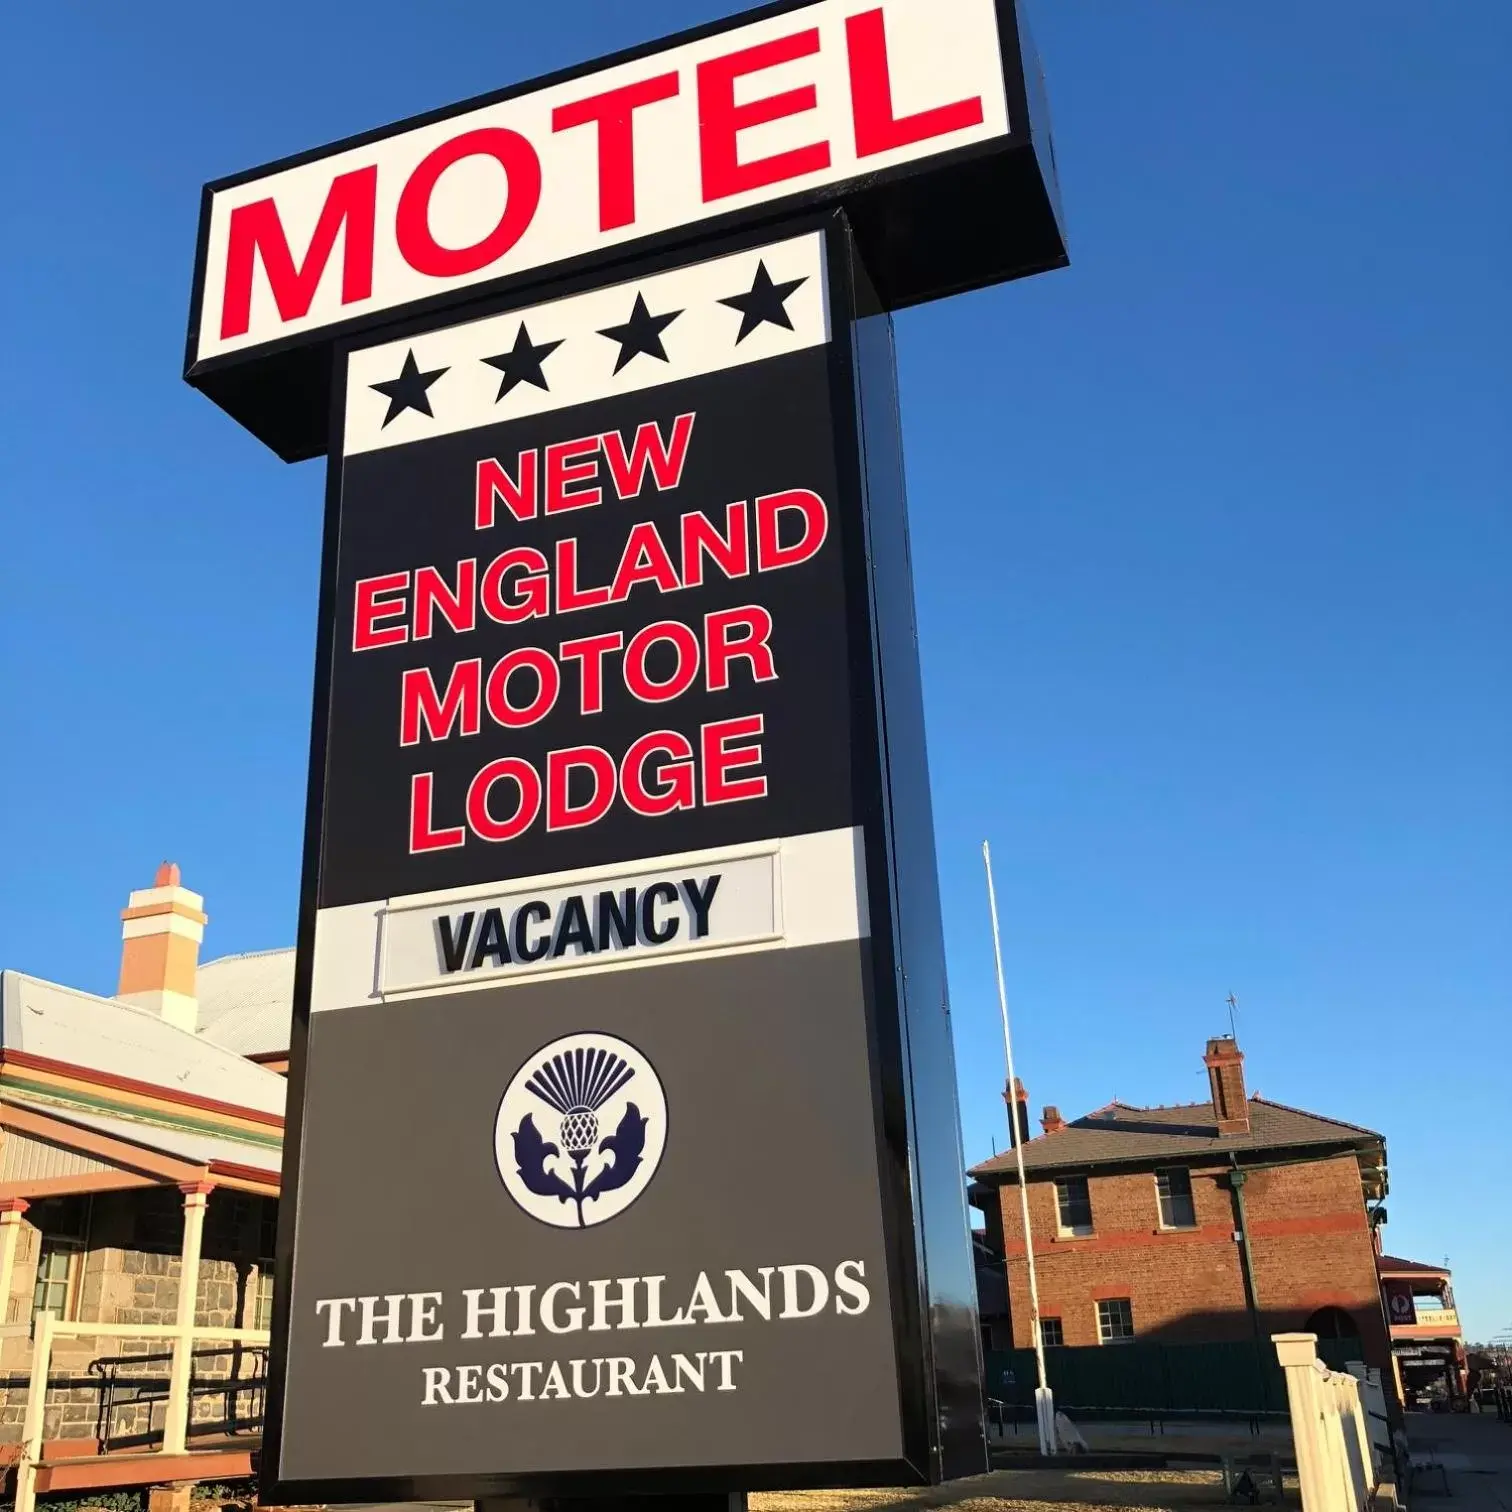 Property logo or sign in New England Motor Lodge